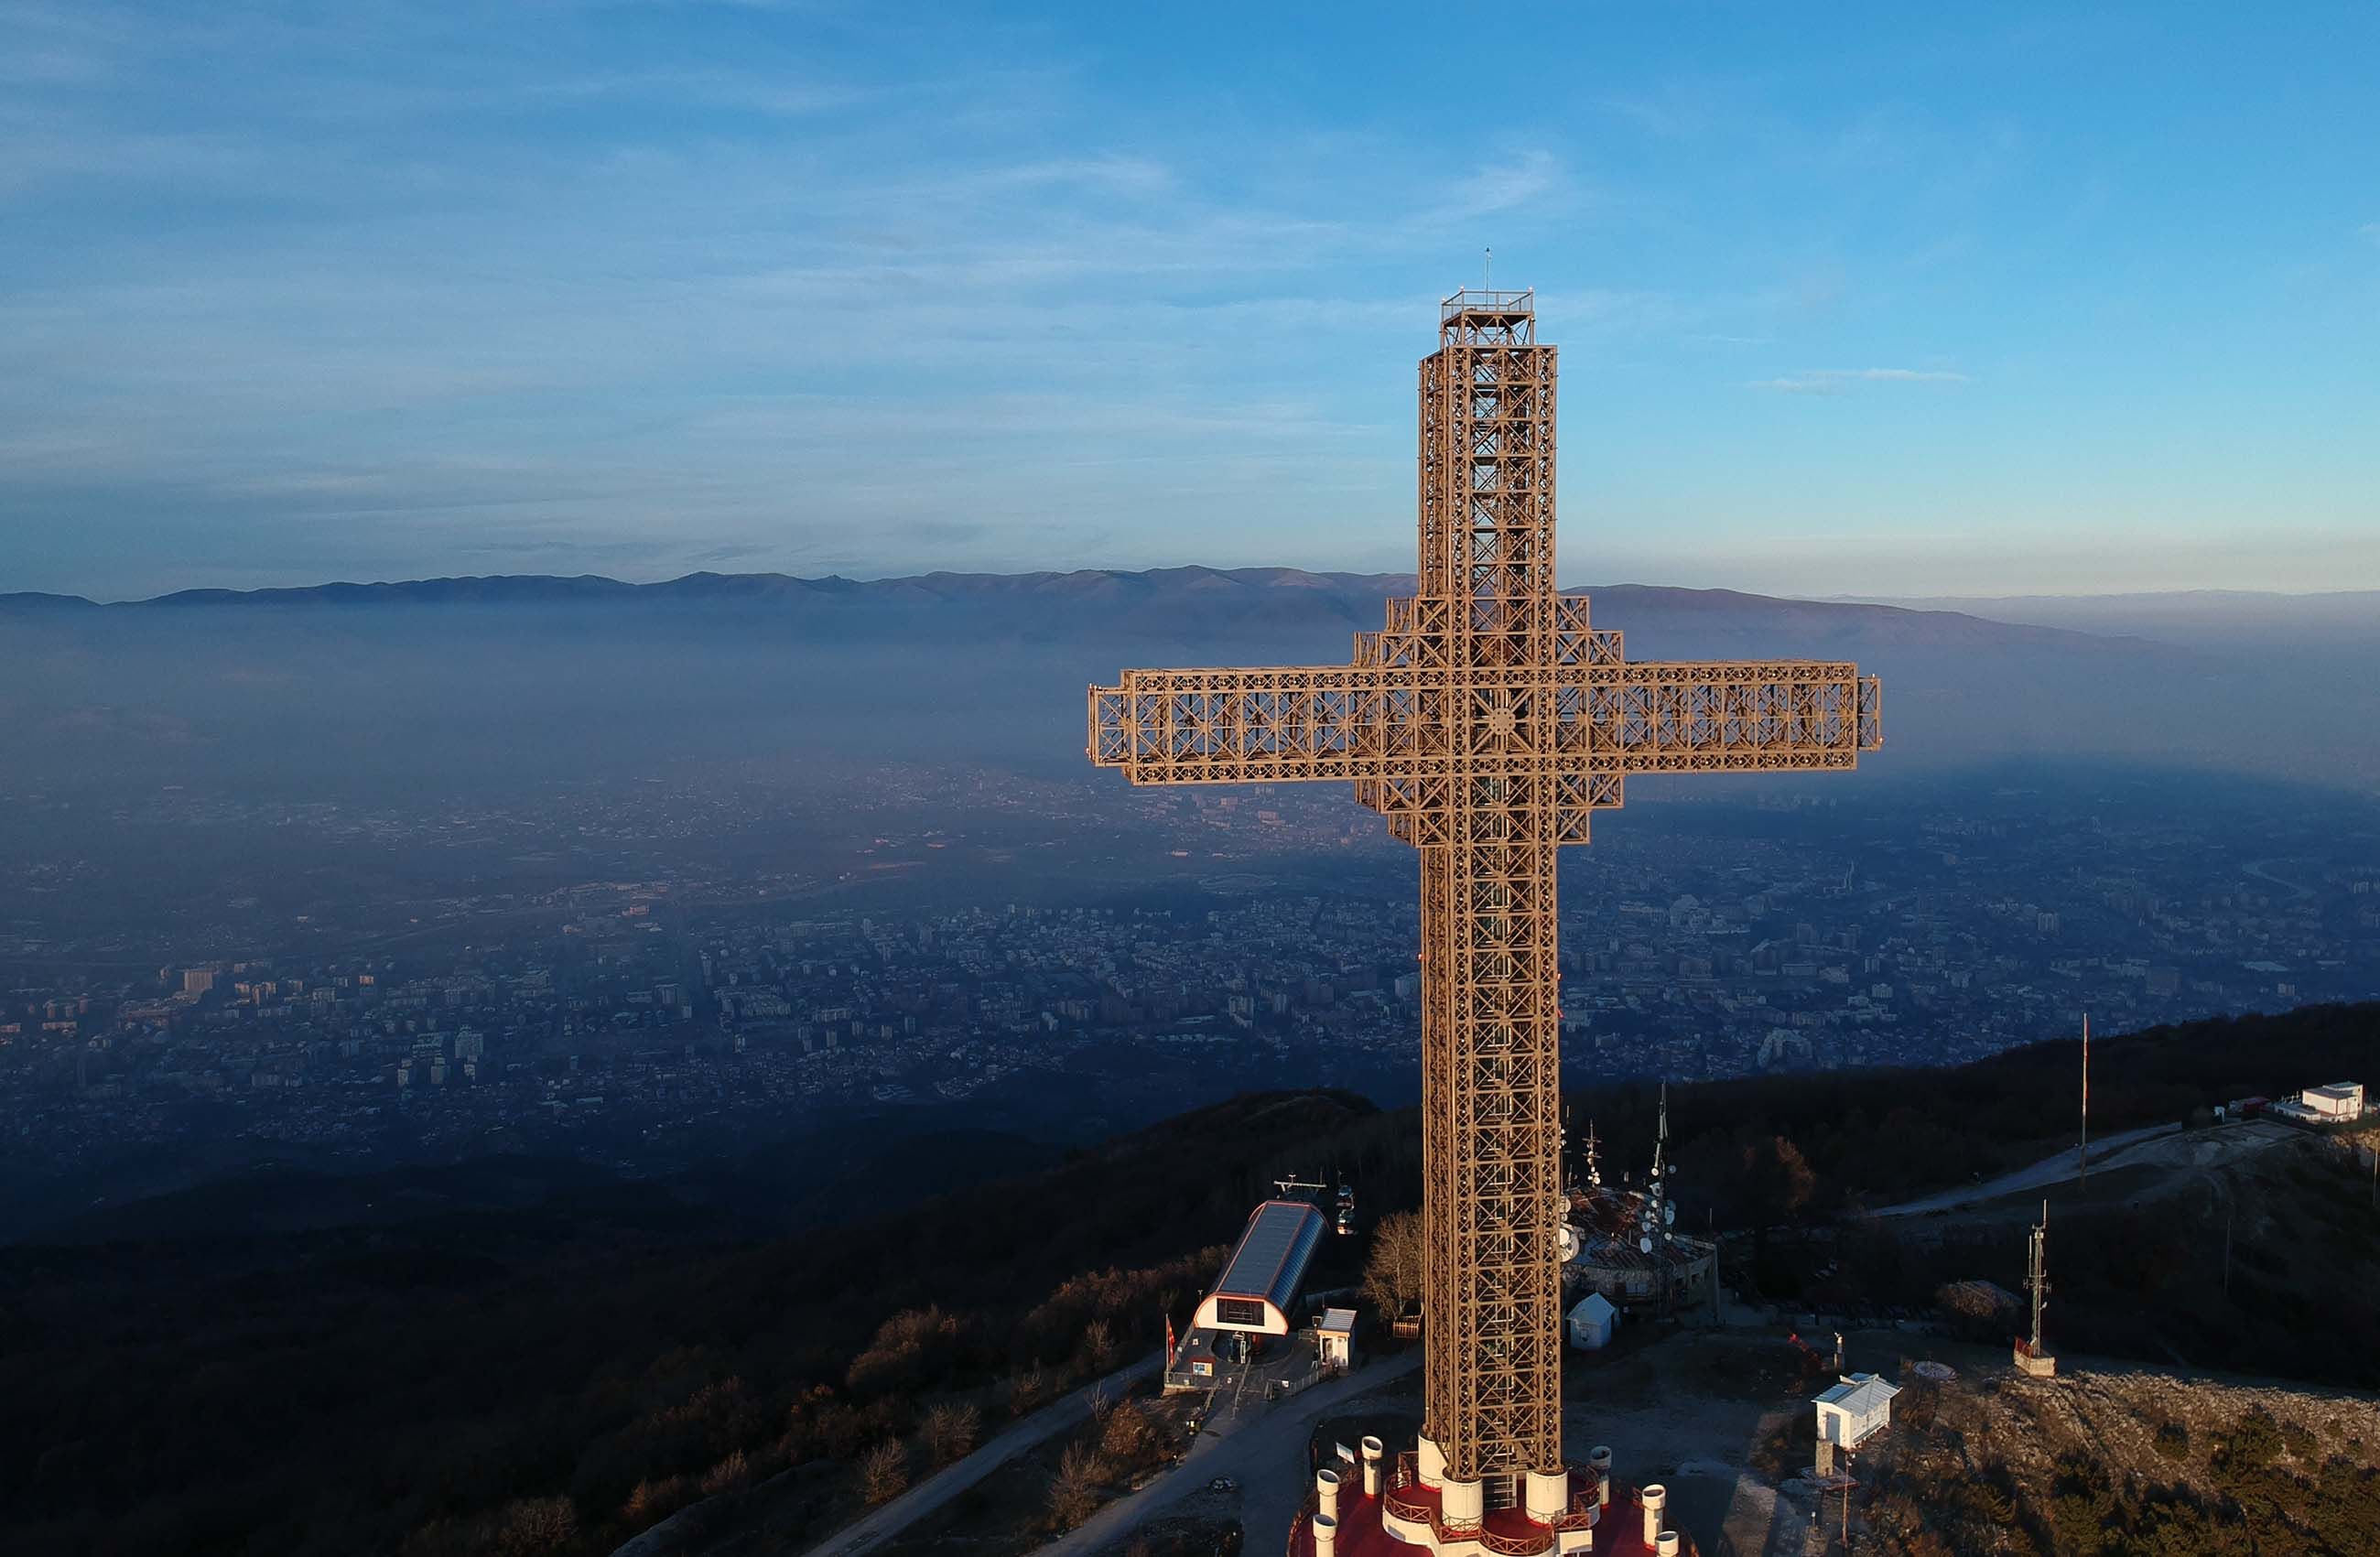 A cross atop Mt. Vodno looks down over hazy Skopje. Whether 2019 will bring clearer air is an open question, but many say they are hopeful. Image by Larry C. Price. Macedonia, 2018.